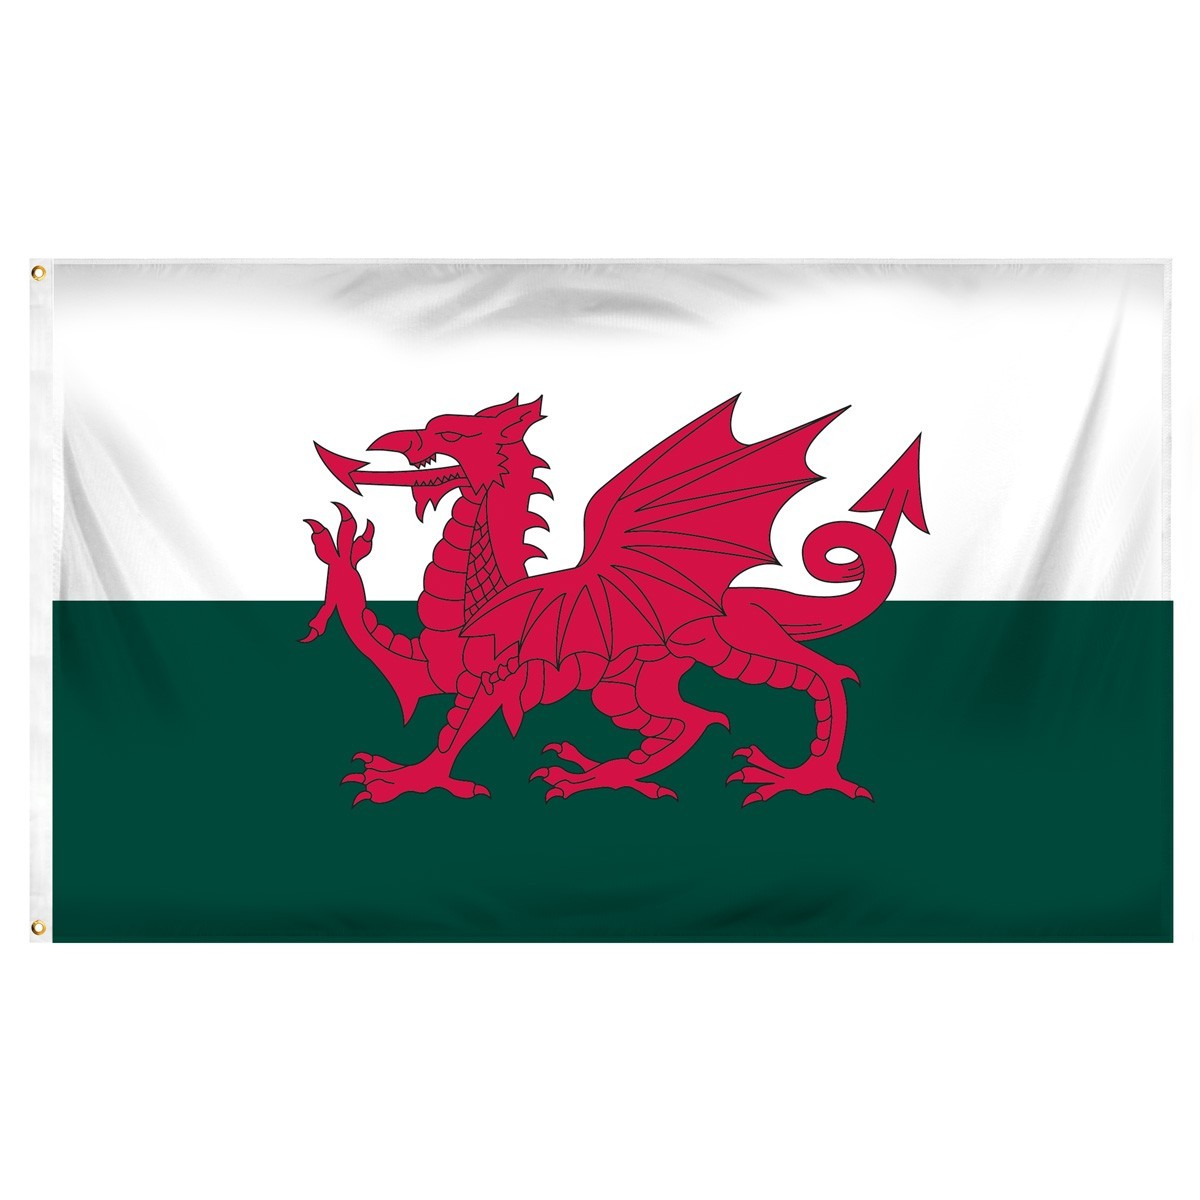 Wales Flags